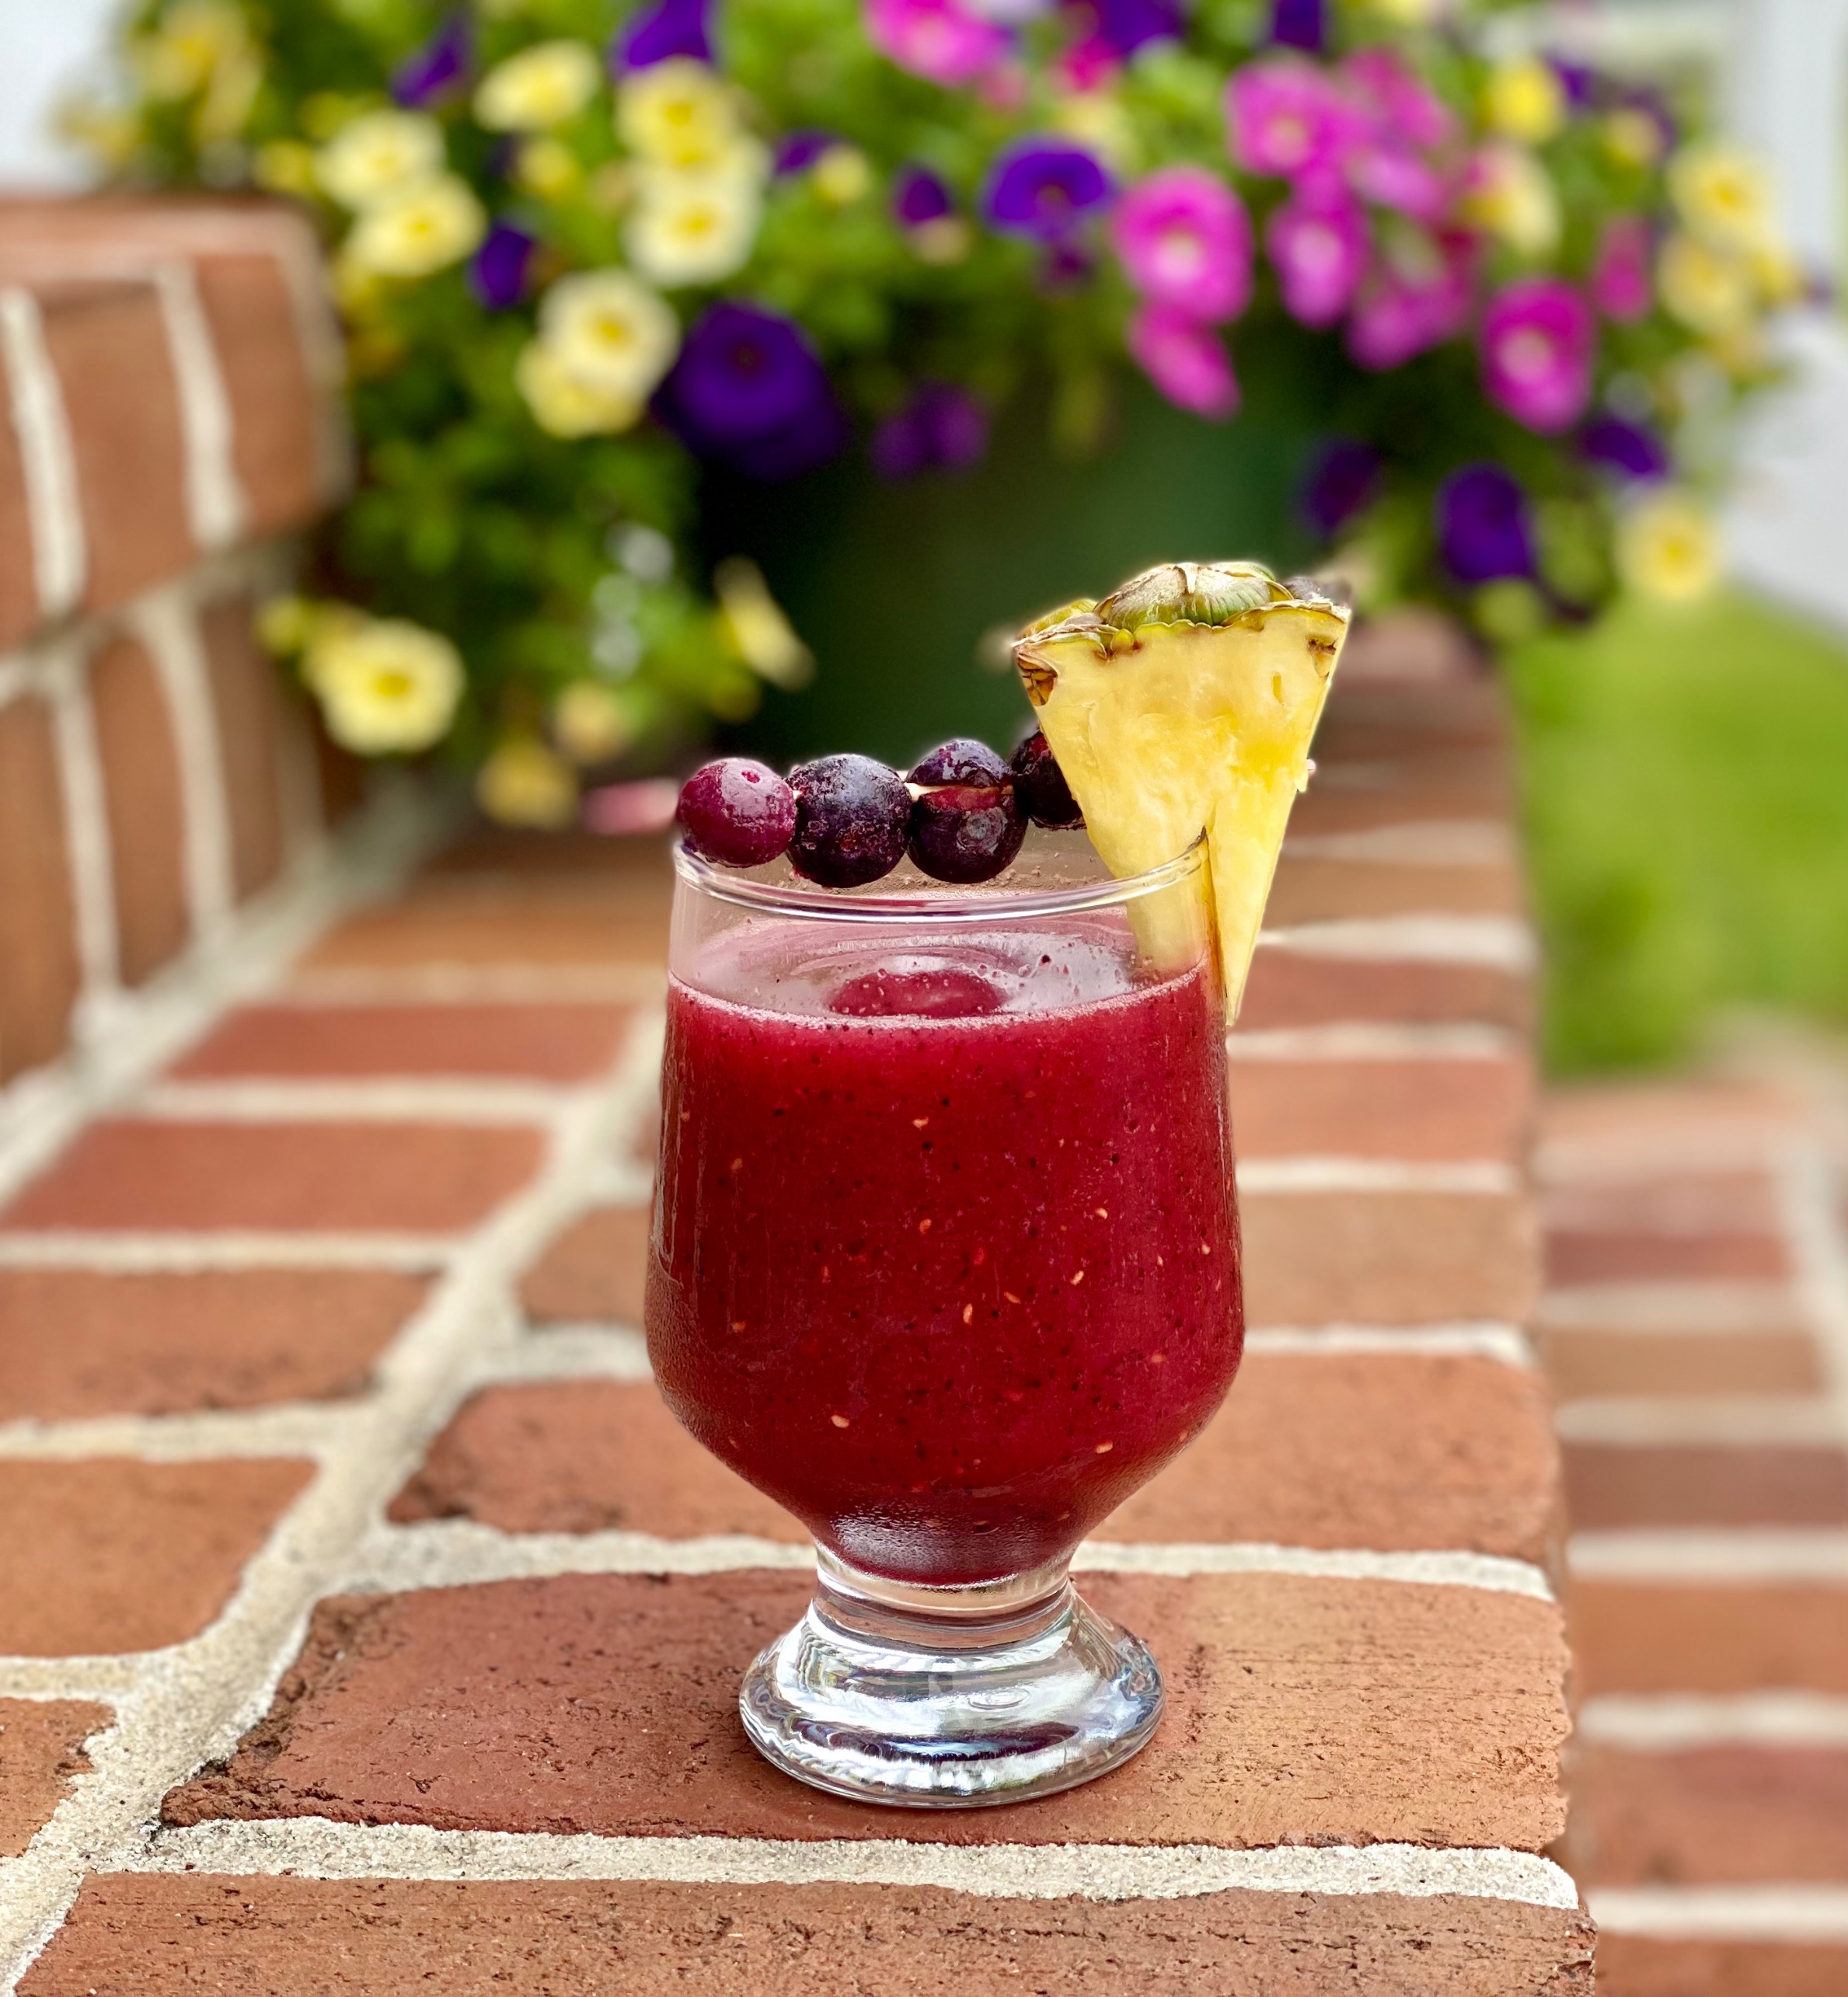 Rum cocktail with mixed berries and pina colada mix